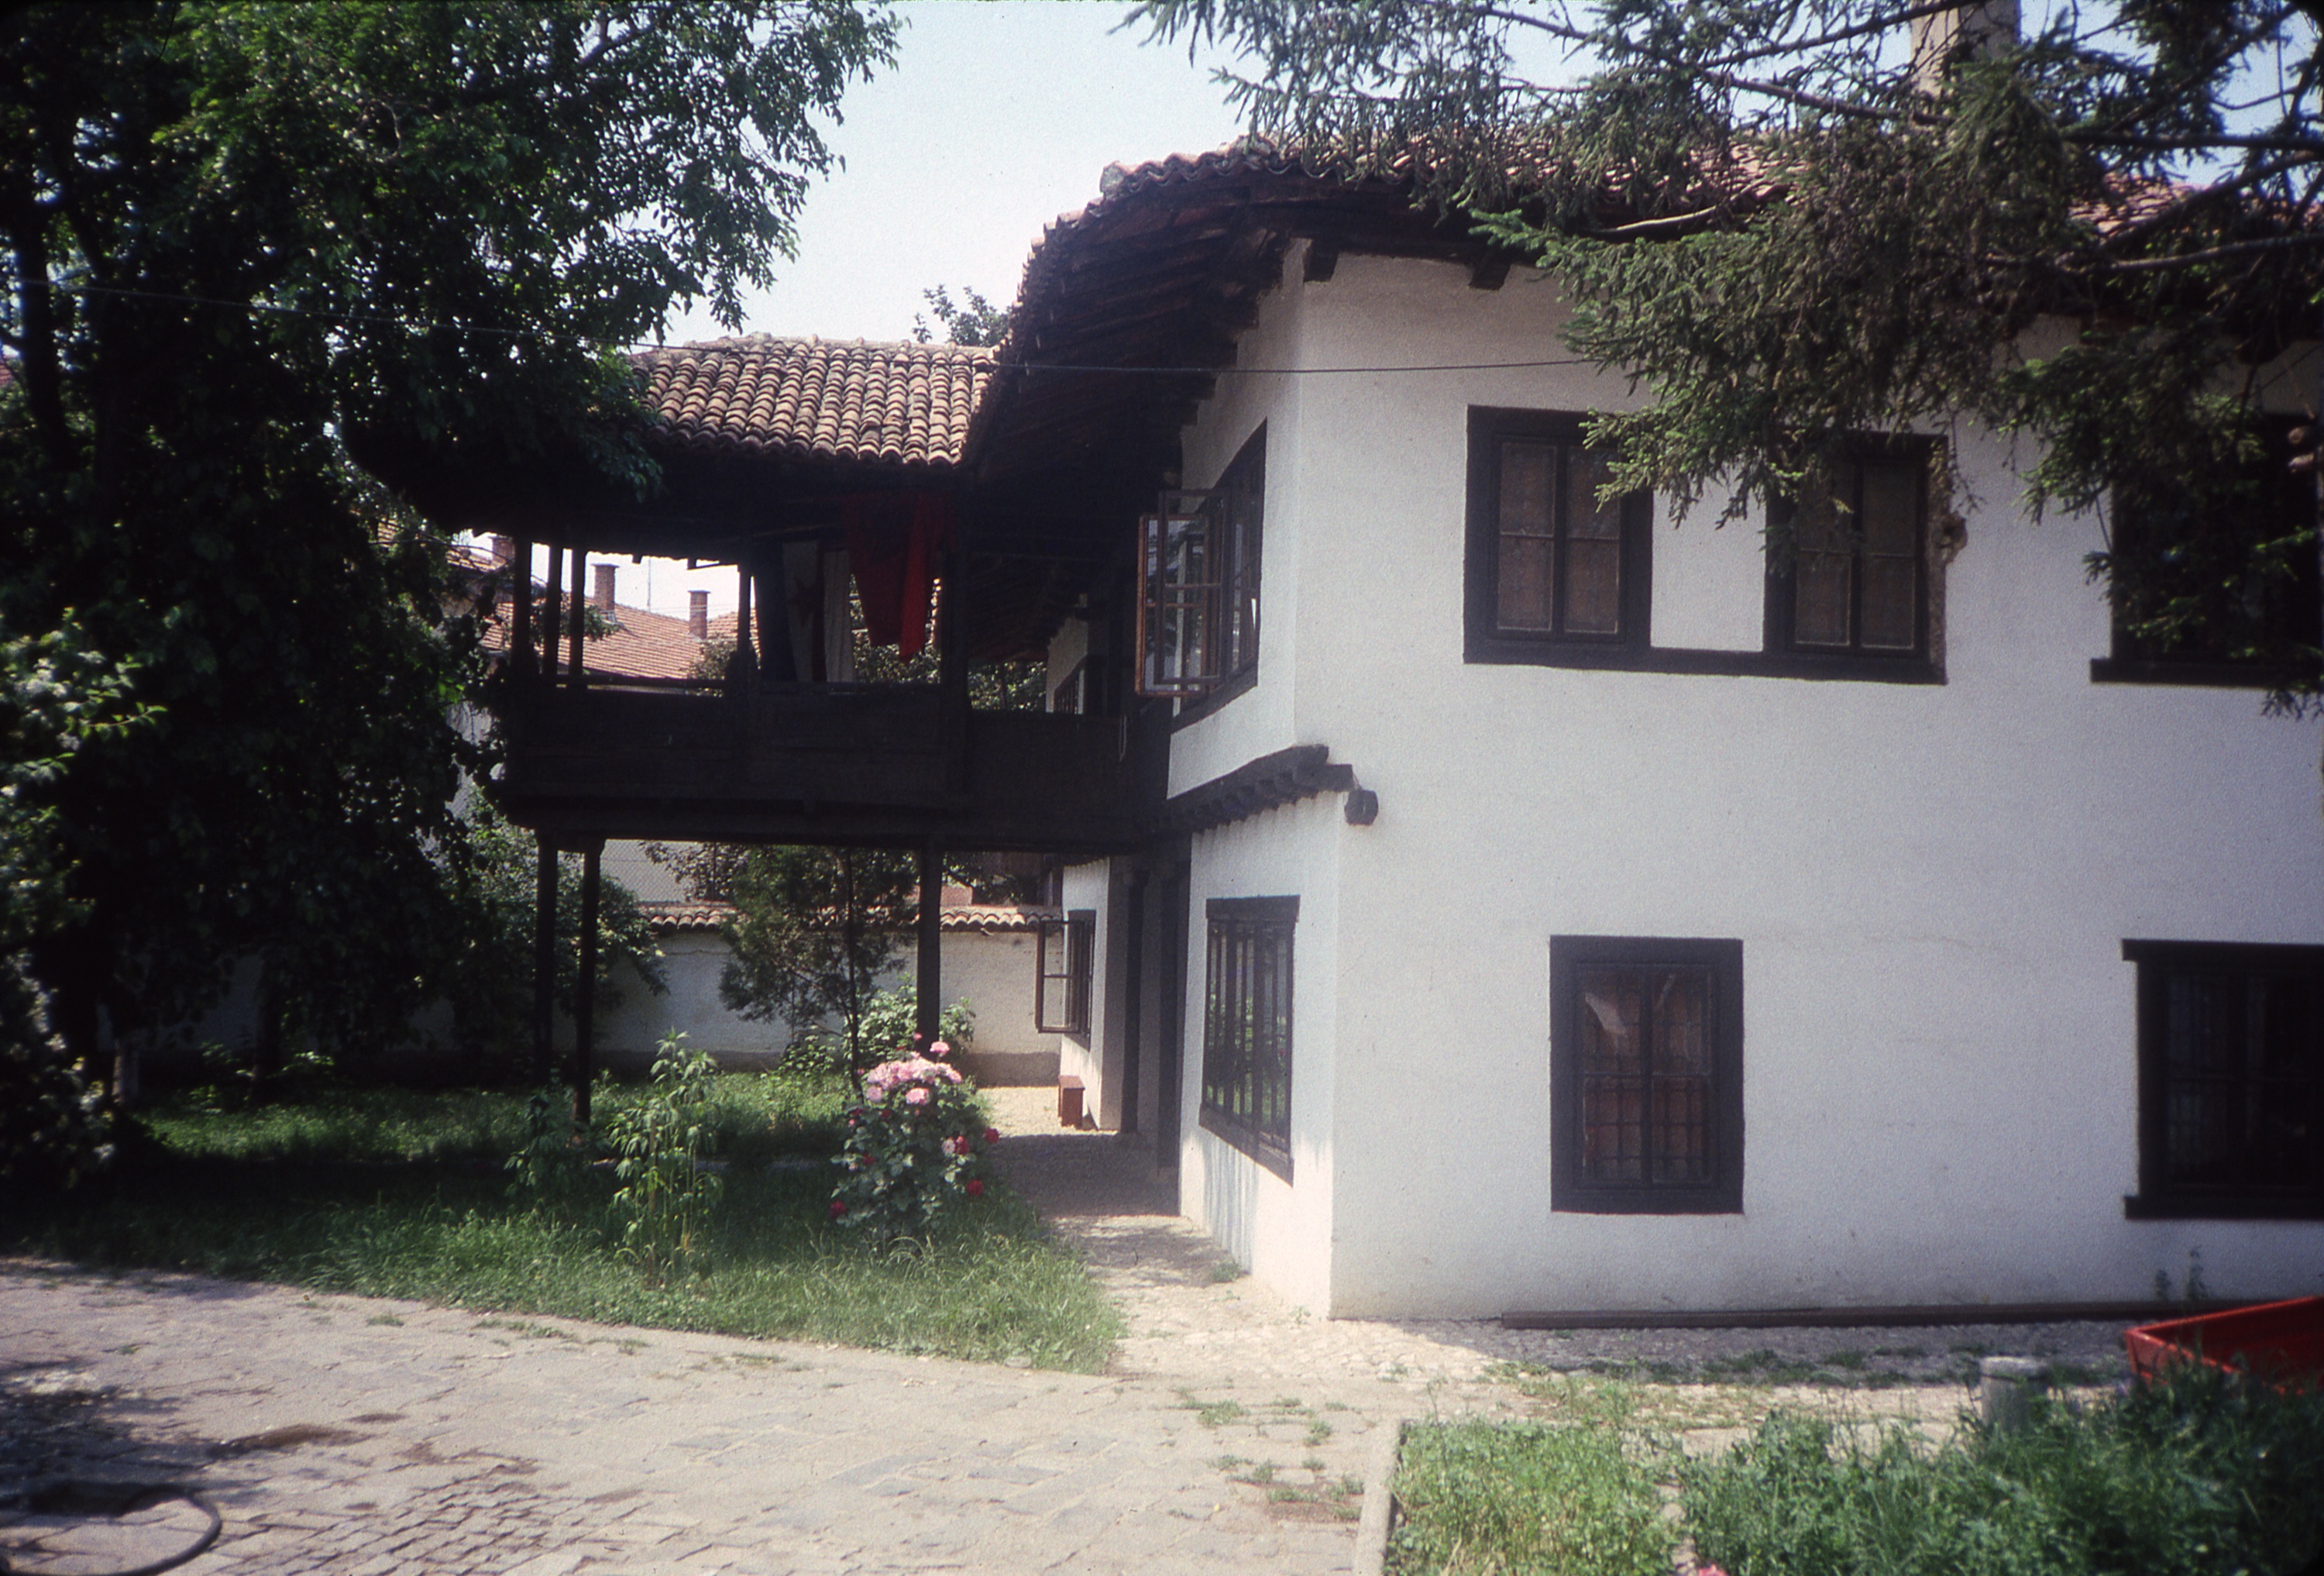 <p>This house that was owned by the Kocadiši family was constructed during the late Ottoman period and is set within a walled garden. The symmetrically composed dwelling has a central hall that opens to the large projecting čardak, which has built-in seating around its perimeter. It is currently the home of the Kosovo Institute for the Perservation of Cultural Monuments. The survey drawings of this dwelling show that there had previously been an exterior wooden stair on the far side of the čardak (and along the dwelling wall) to allow easy access to the upper level.</p>